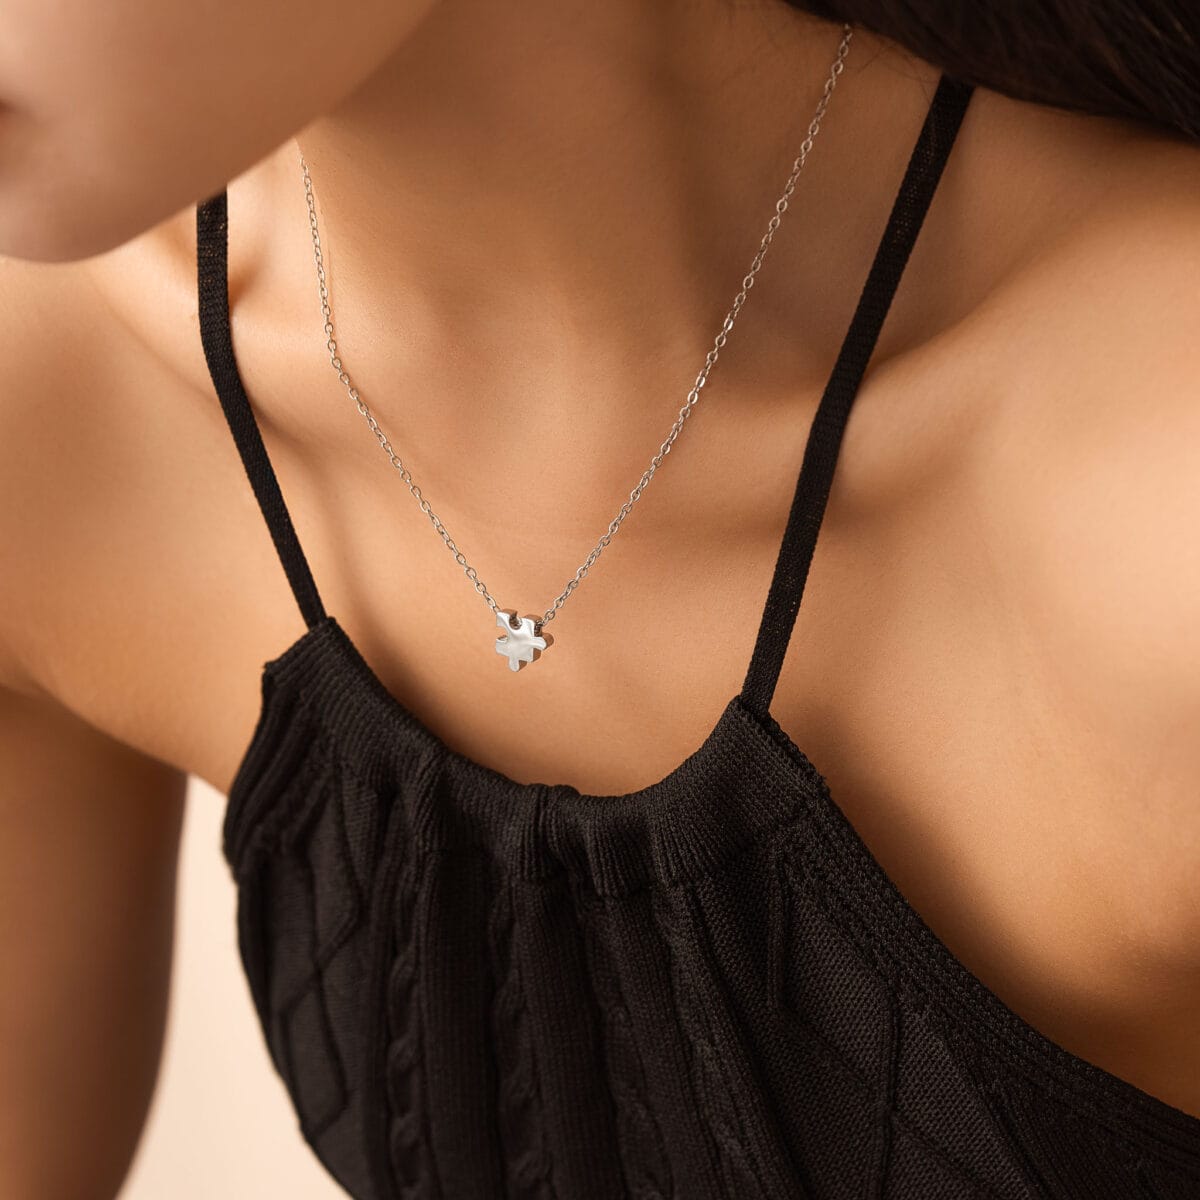 https://m.clubbella.co/product/duna-silver-puzzle-charm-necklace/ Dunna Puzzle Silver charm necklace (3)